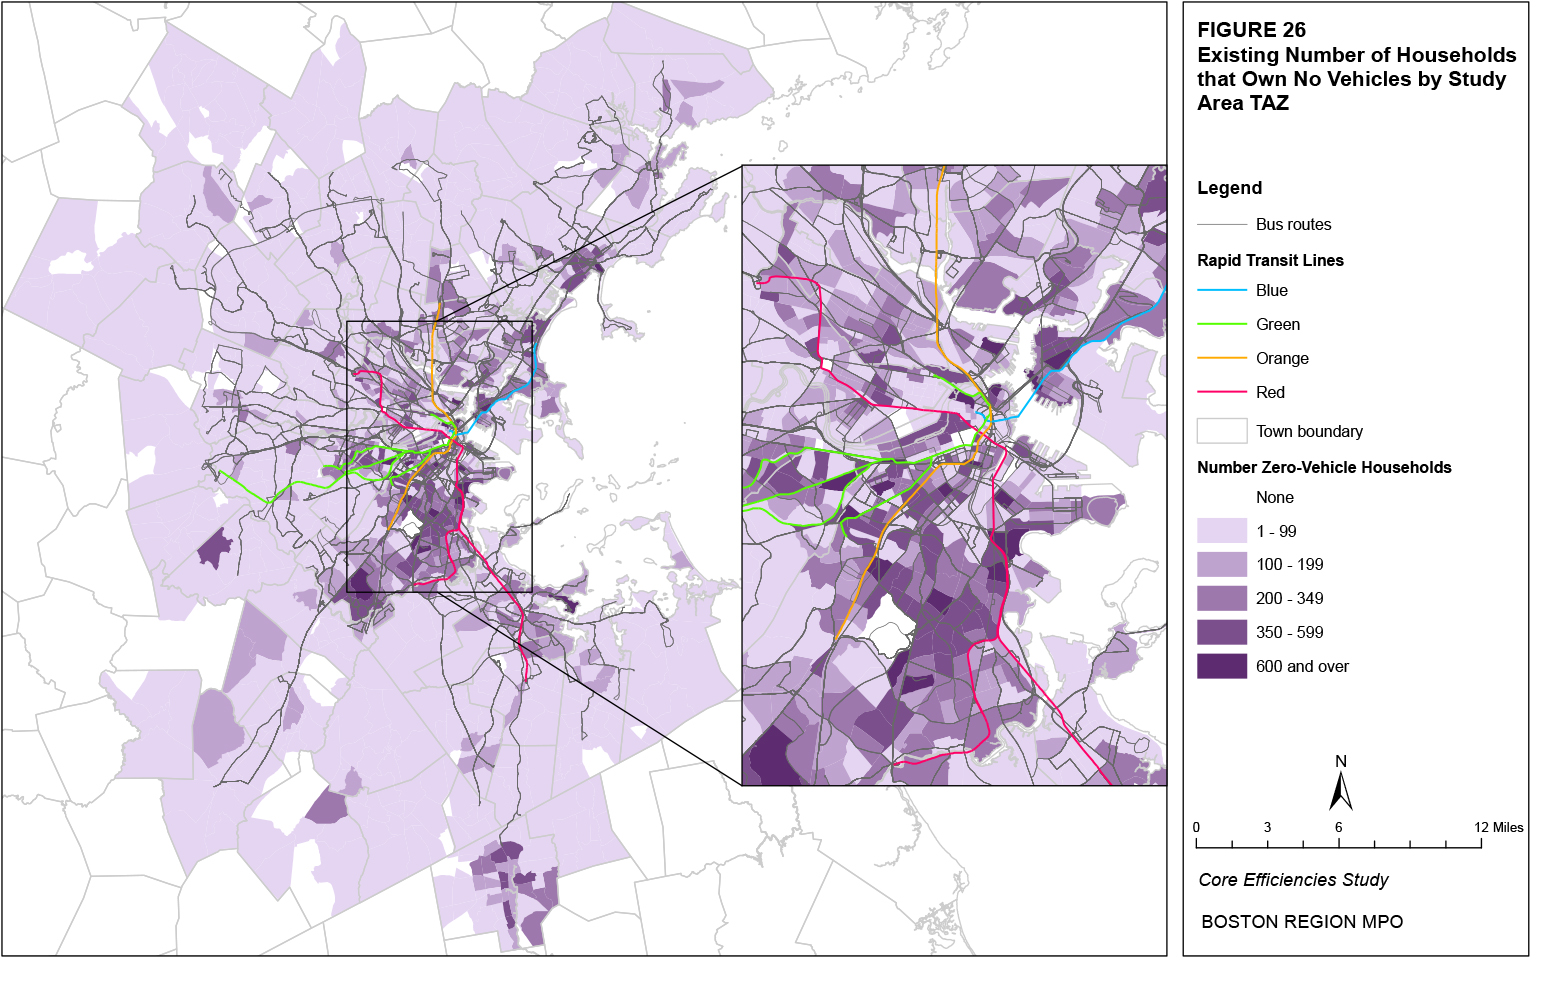 This map shows the existing number of households that own no vehicles by TAZ.